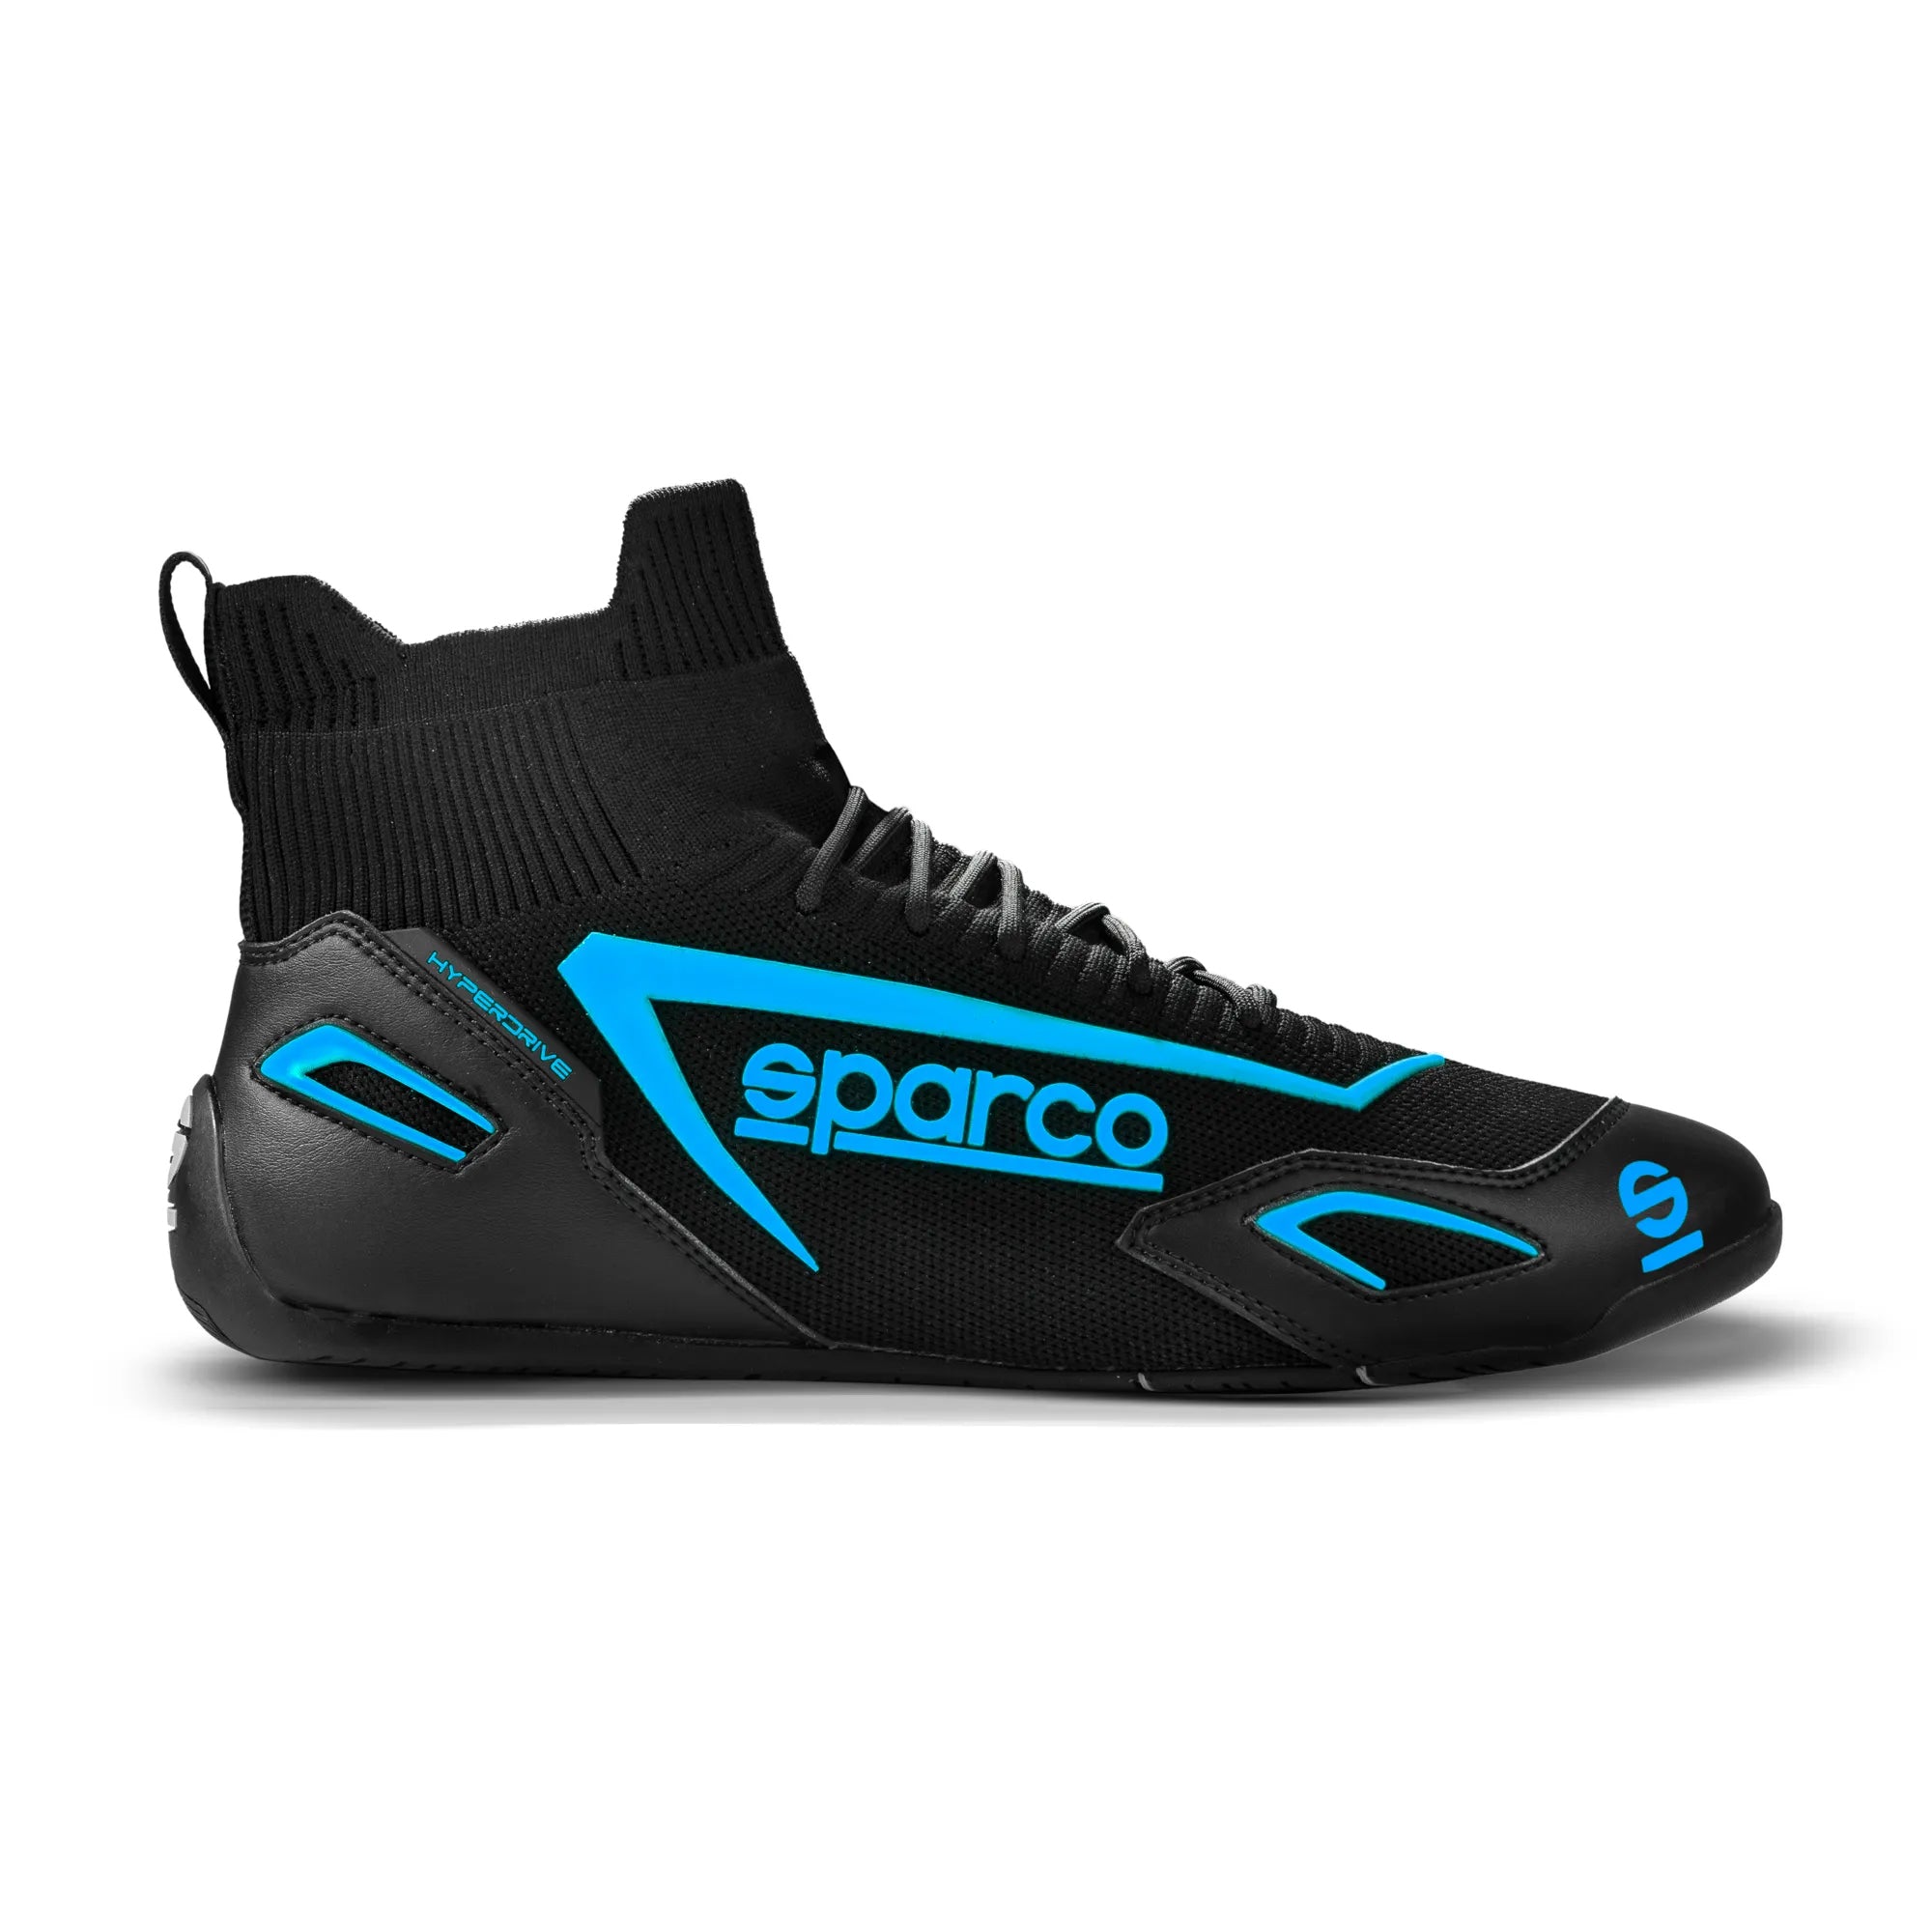 SPARCO 00129341NRAZ Gaming sim racing shoes HYPERDRIVE, black/blue, size 41 Photo-0 